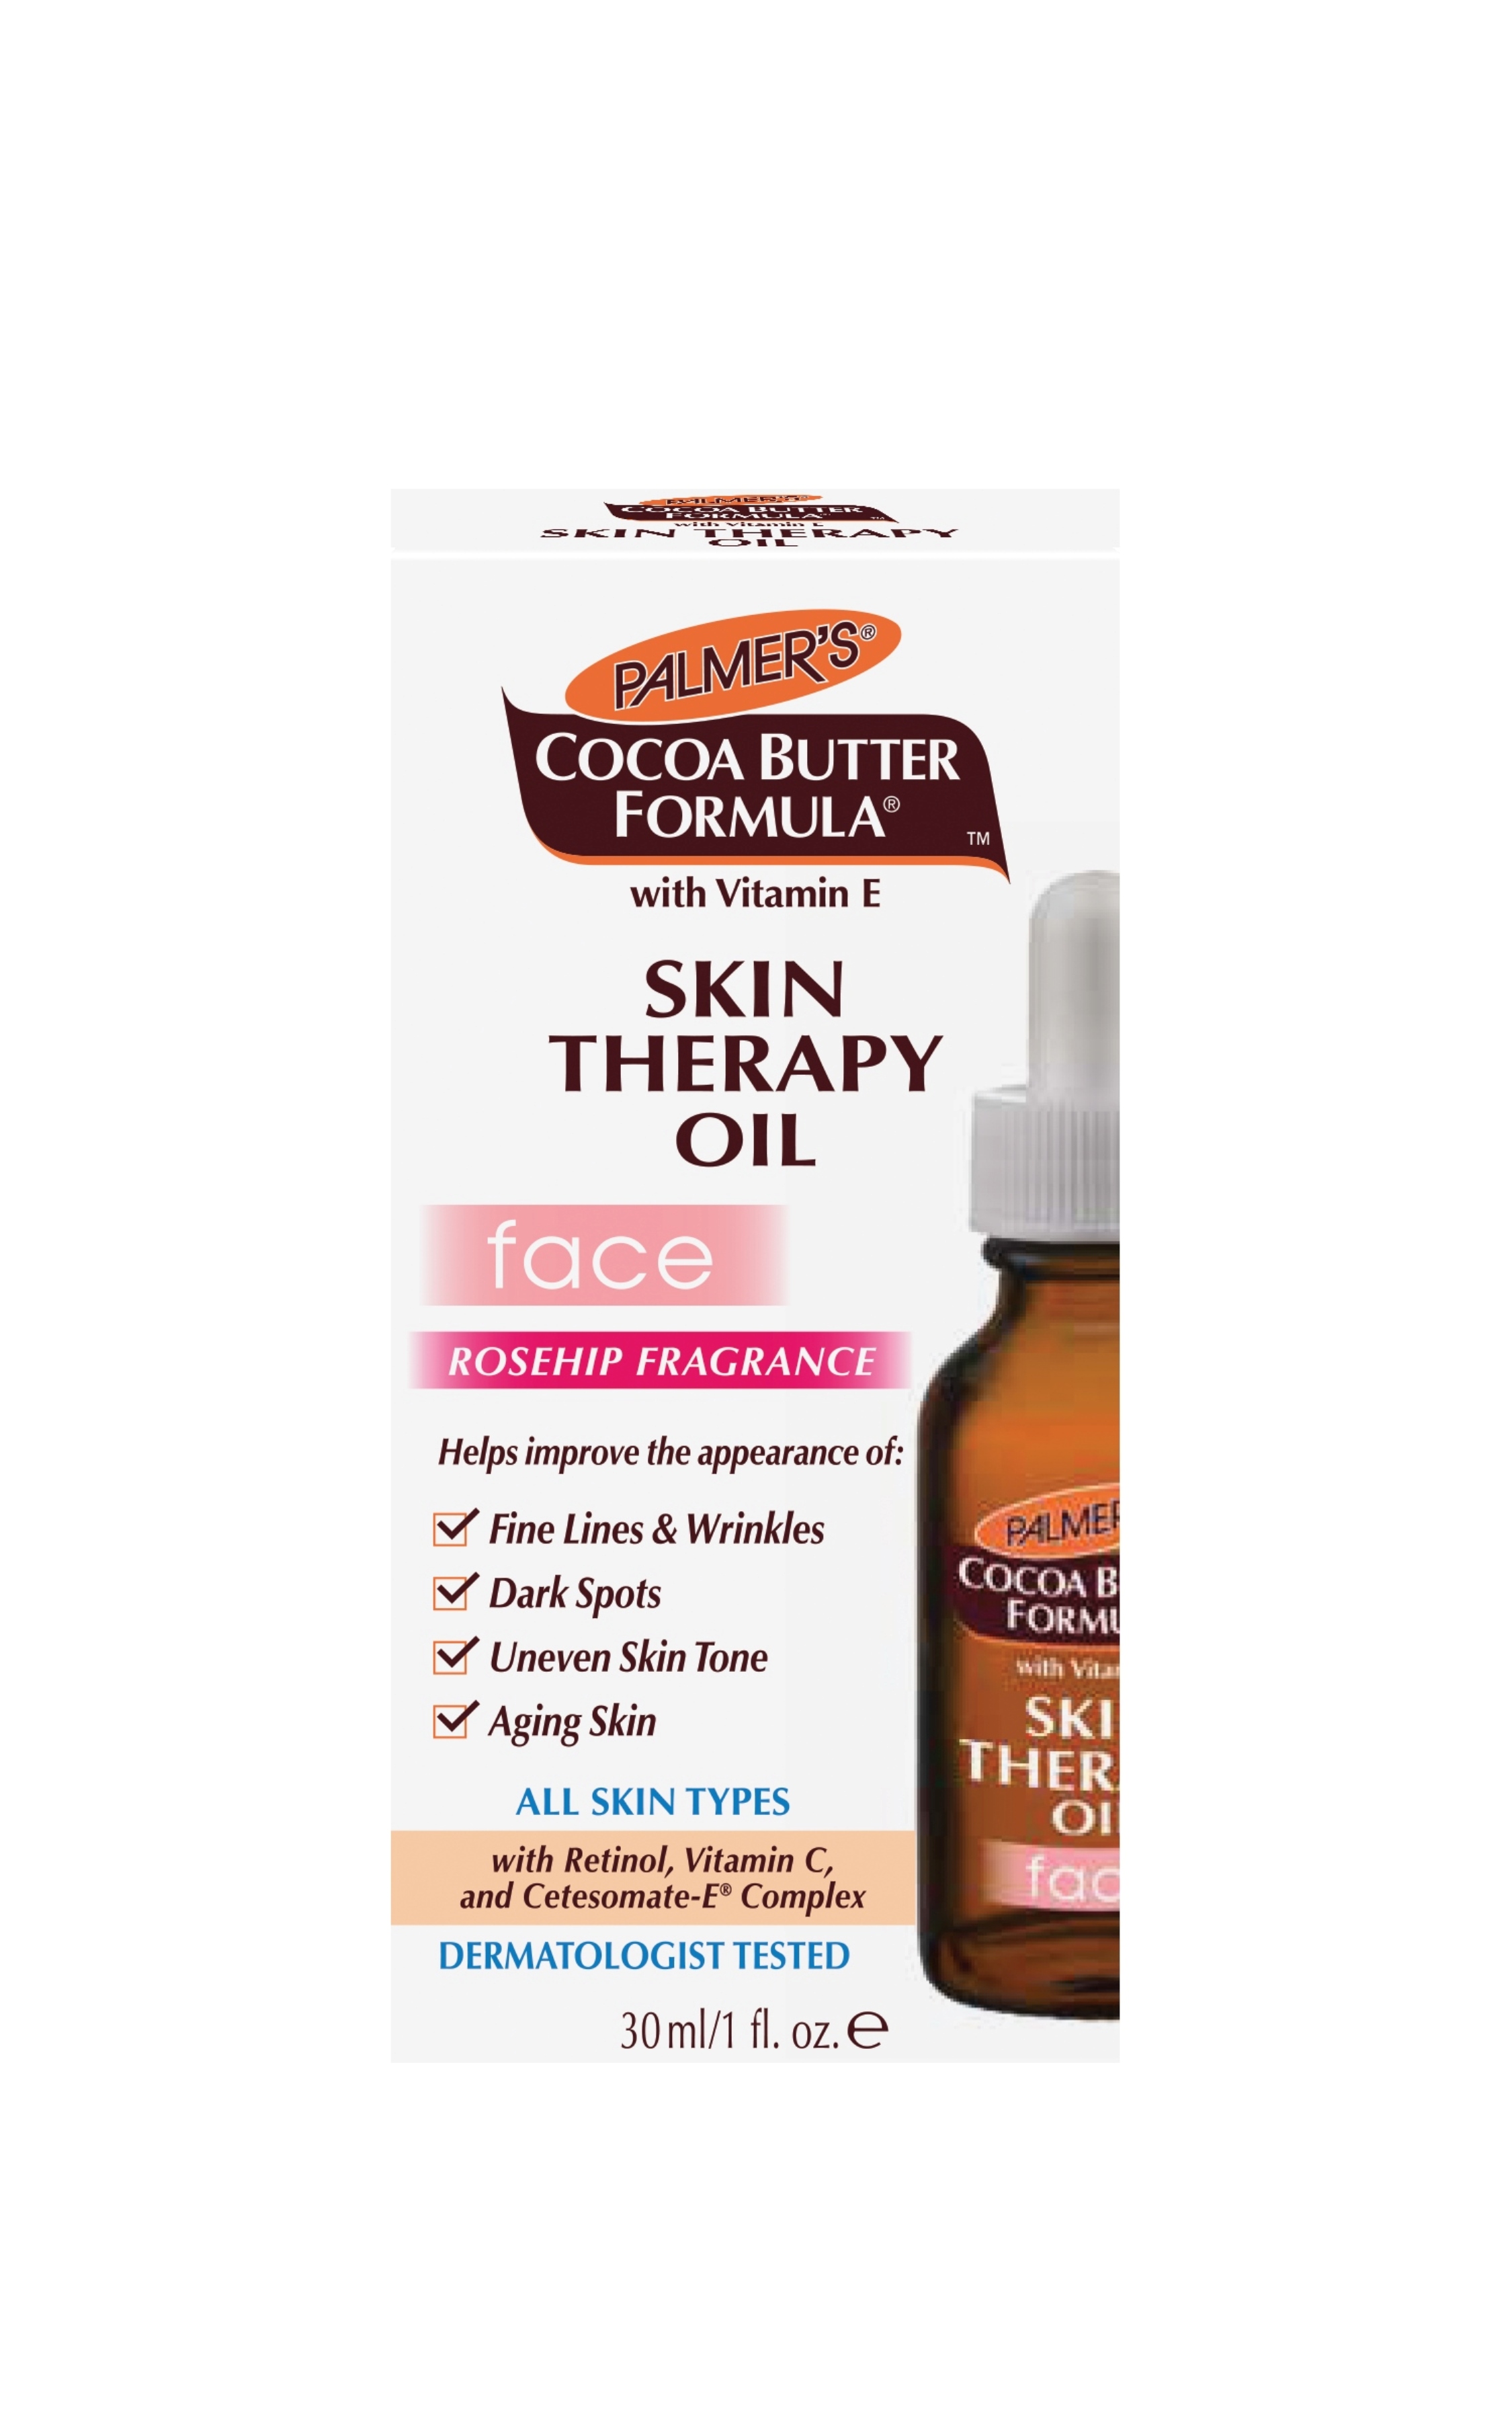 Palmer's Skin Therapy Oil Face with Vitamin E Rosehip Fragrance 1 oz ...